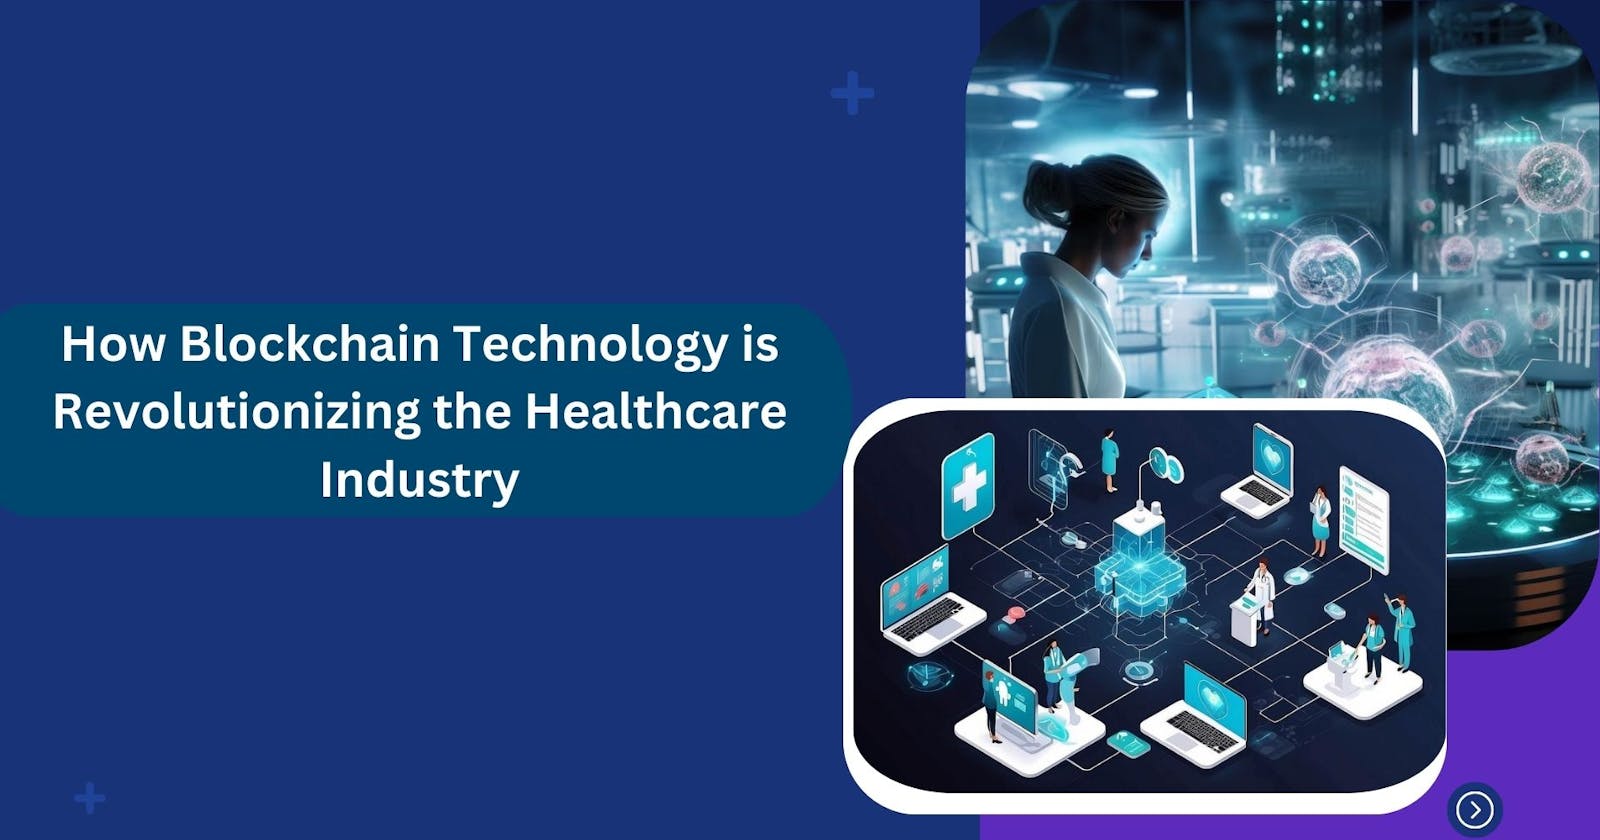 How Blockchain Technology is Revolutionizing the Healthcare Industry